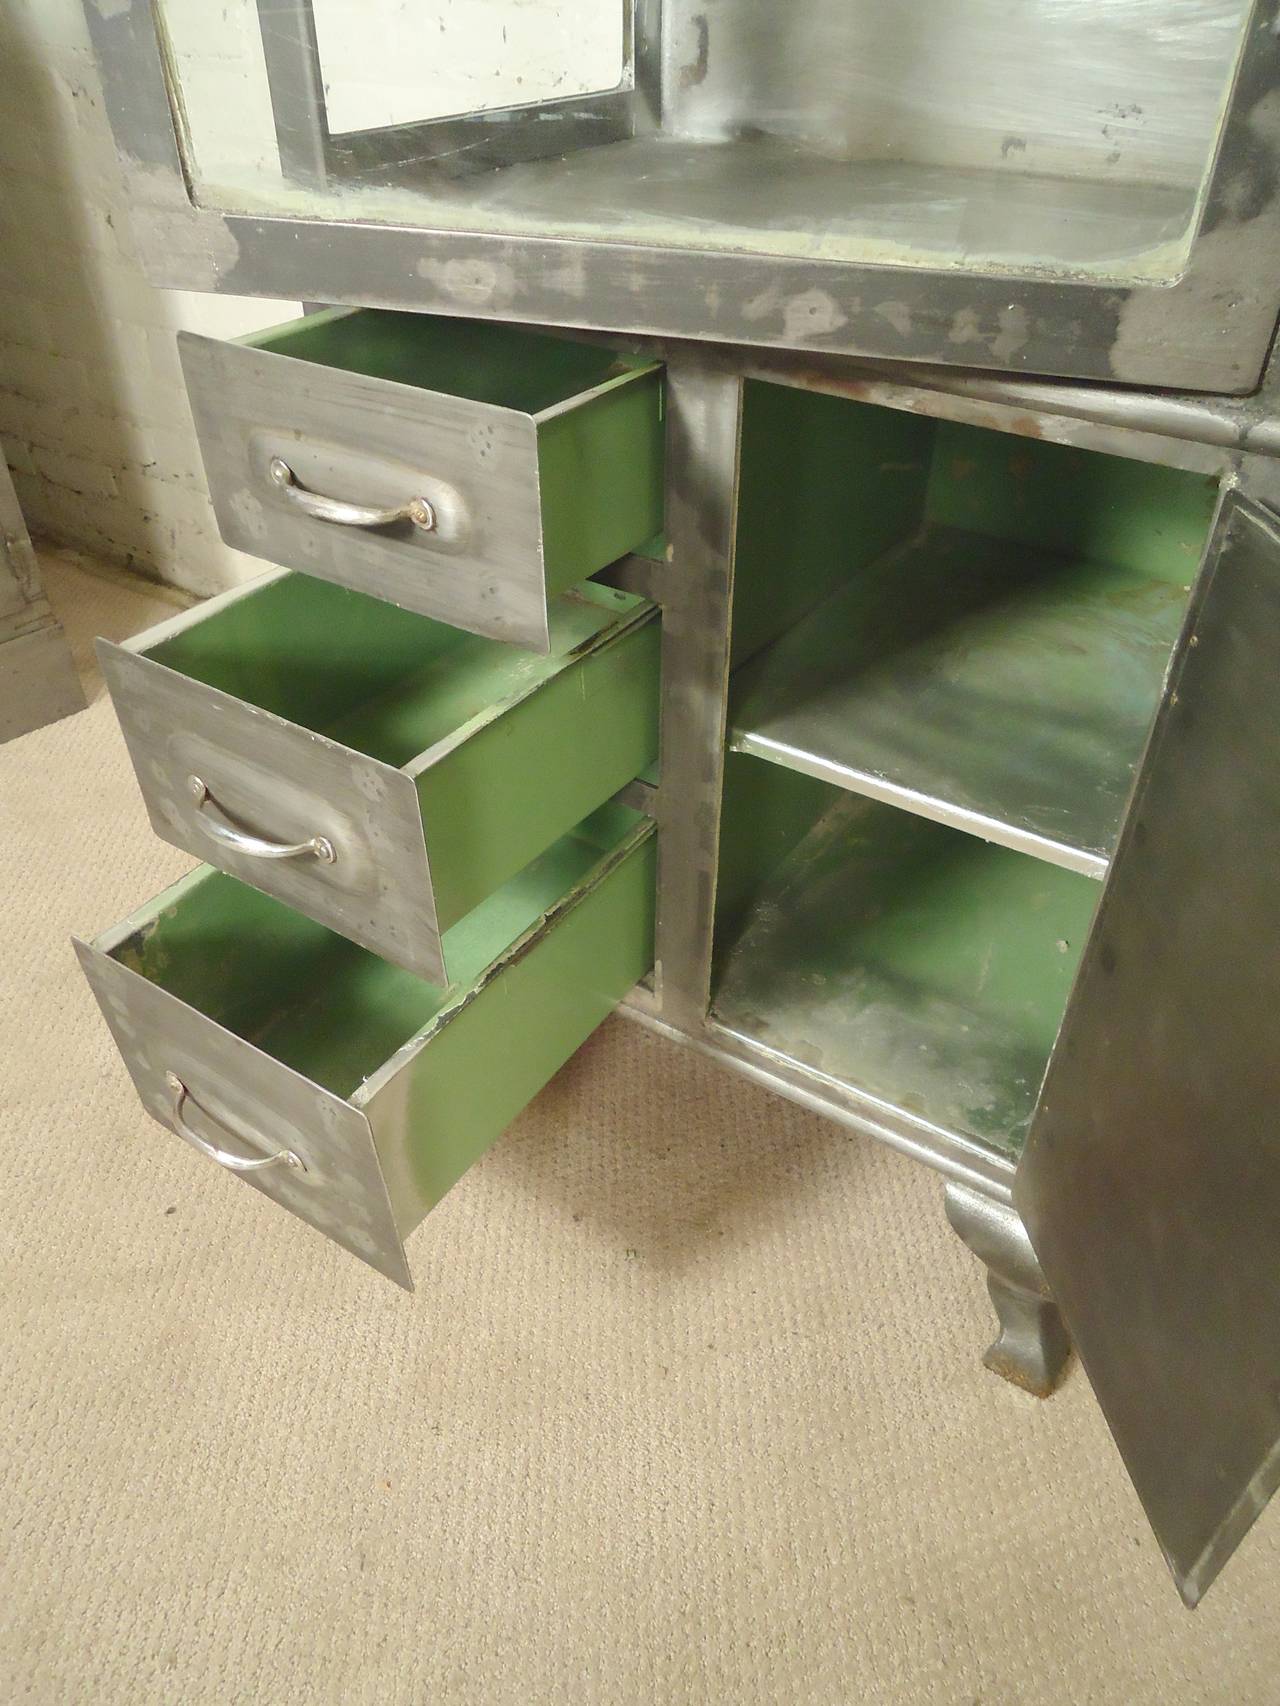 Vintage Hospital Cabinet Refinished In Distressed Condition In Brooklyn, NY